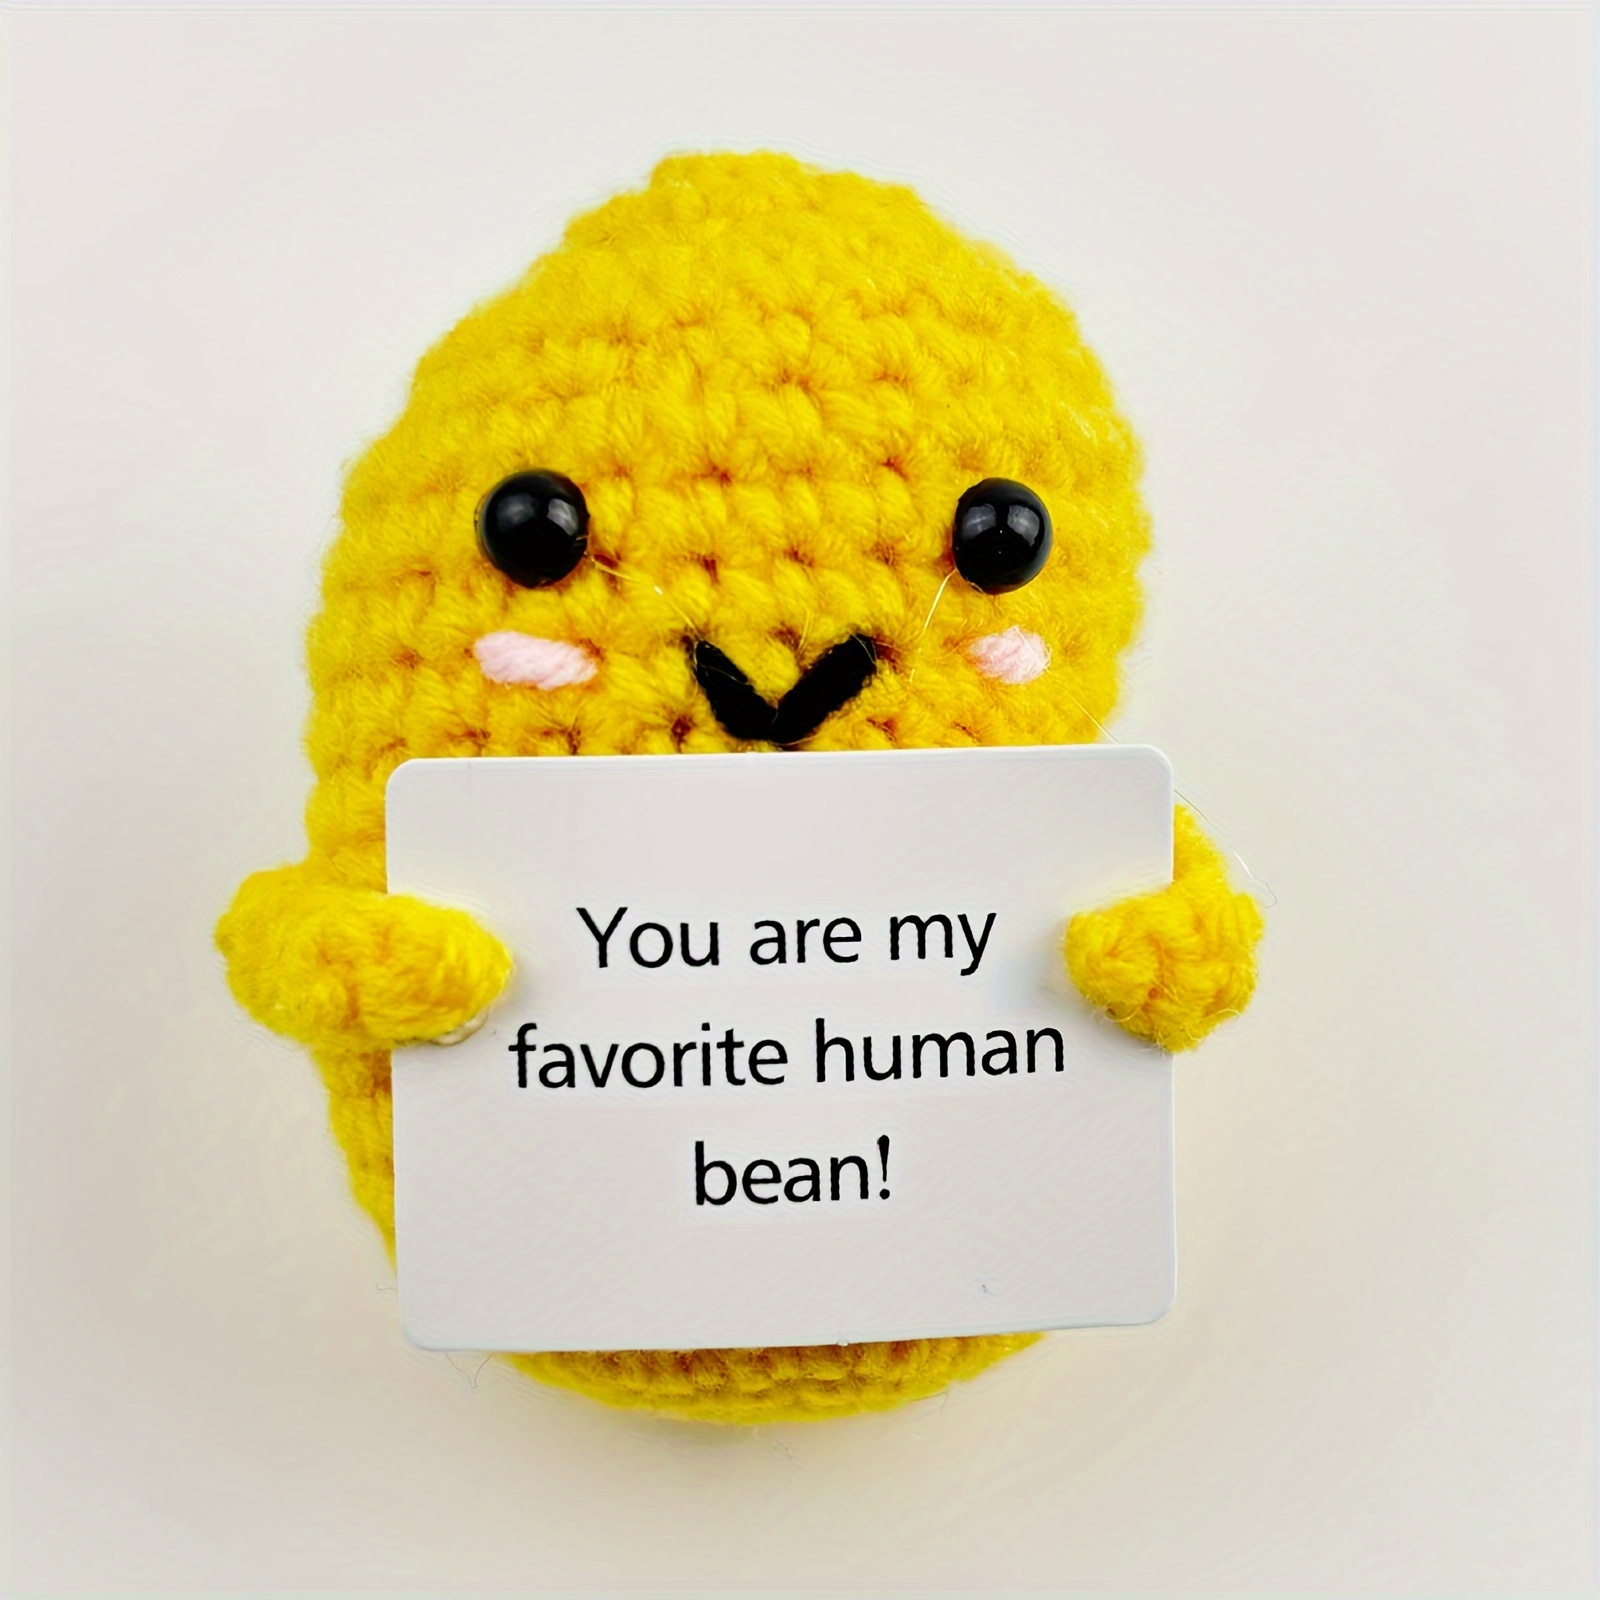  Mini Funny Positive Potato, 3 inch Knitted Potato Toy with  Positive Card Creative Cute Wool Positive Potato Crochet Doll Cheer Up  Gifts for Friends Party Emotional Life Potato Toy Crochet Potato 